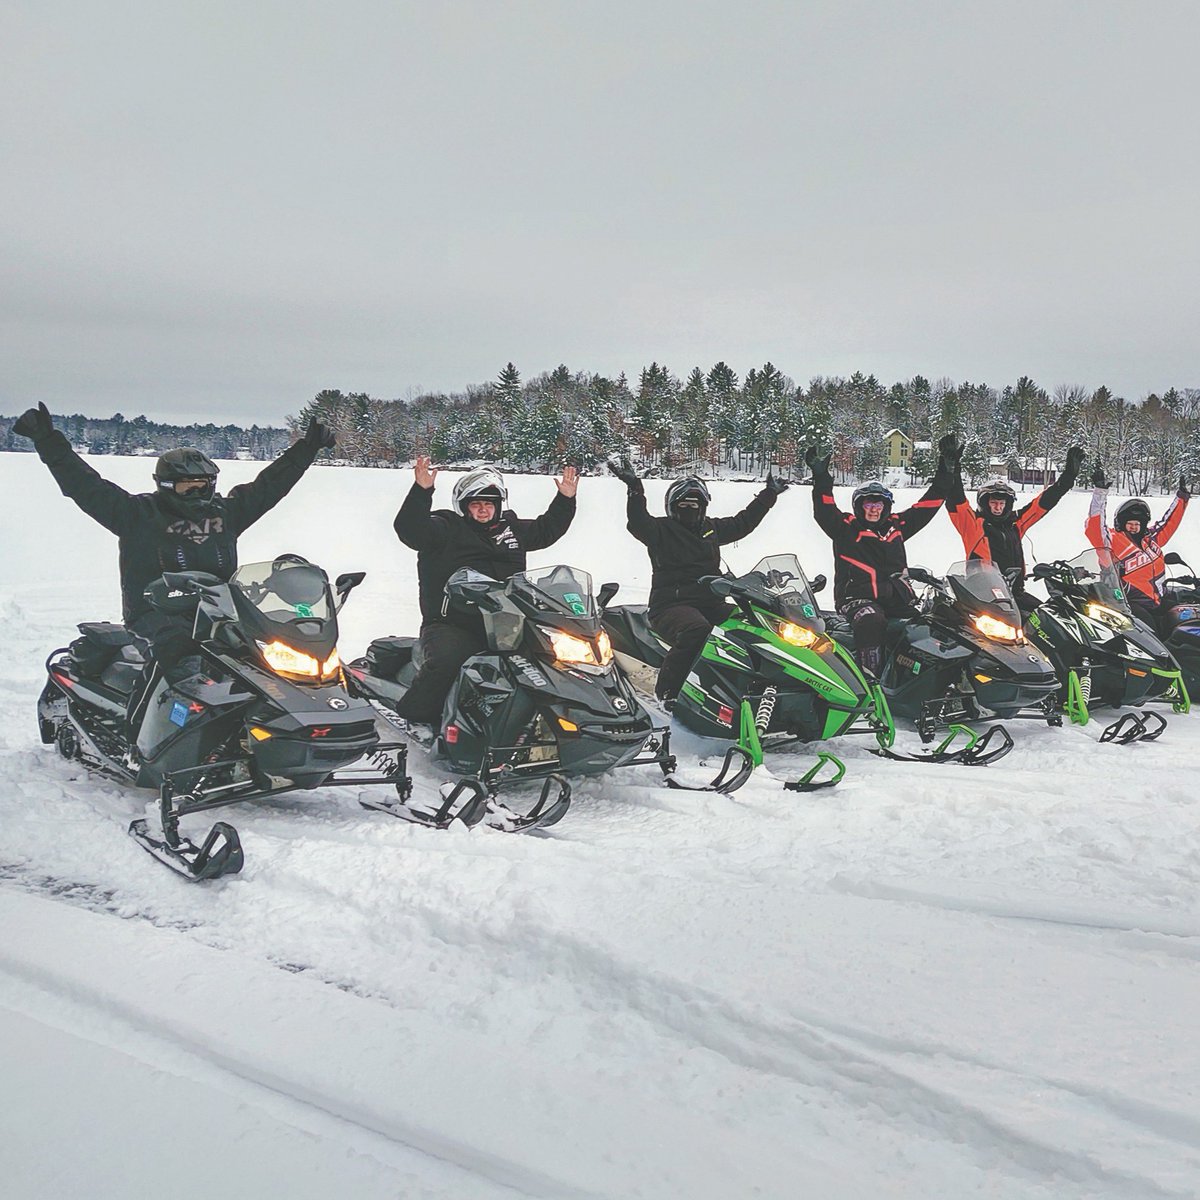 “Everybody makes you feel welcome. It feels like a small family. Excuse me, a large family.” The MS Snowmobile Tour draws riders from across the country and is a memorable event each year. Learn more about the MS Snowmobile Tour here: ntlms.org/MSSnowmobile